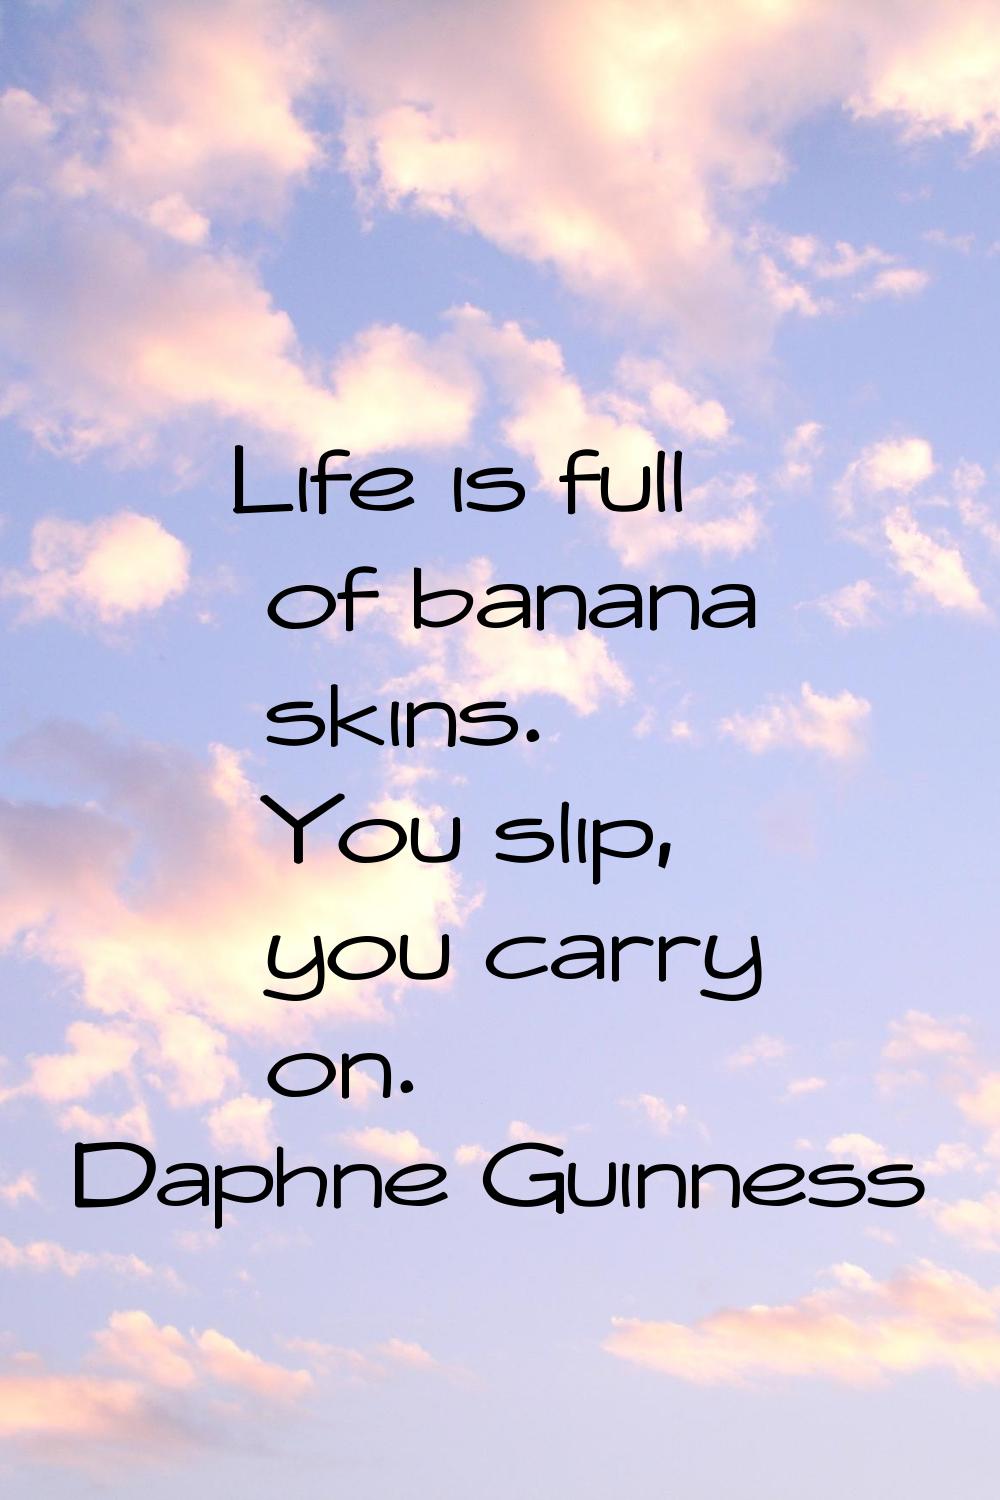 Life is full of banana skins. You slip, you carry on.